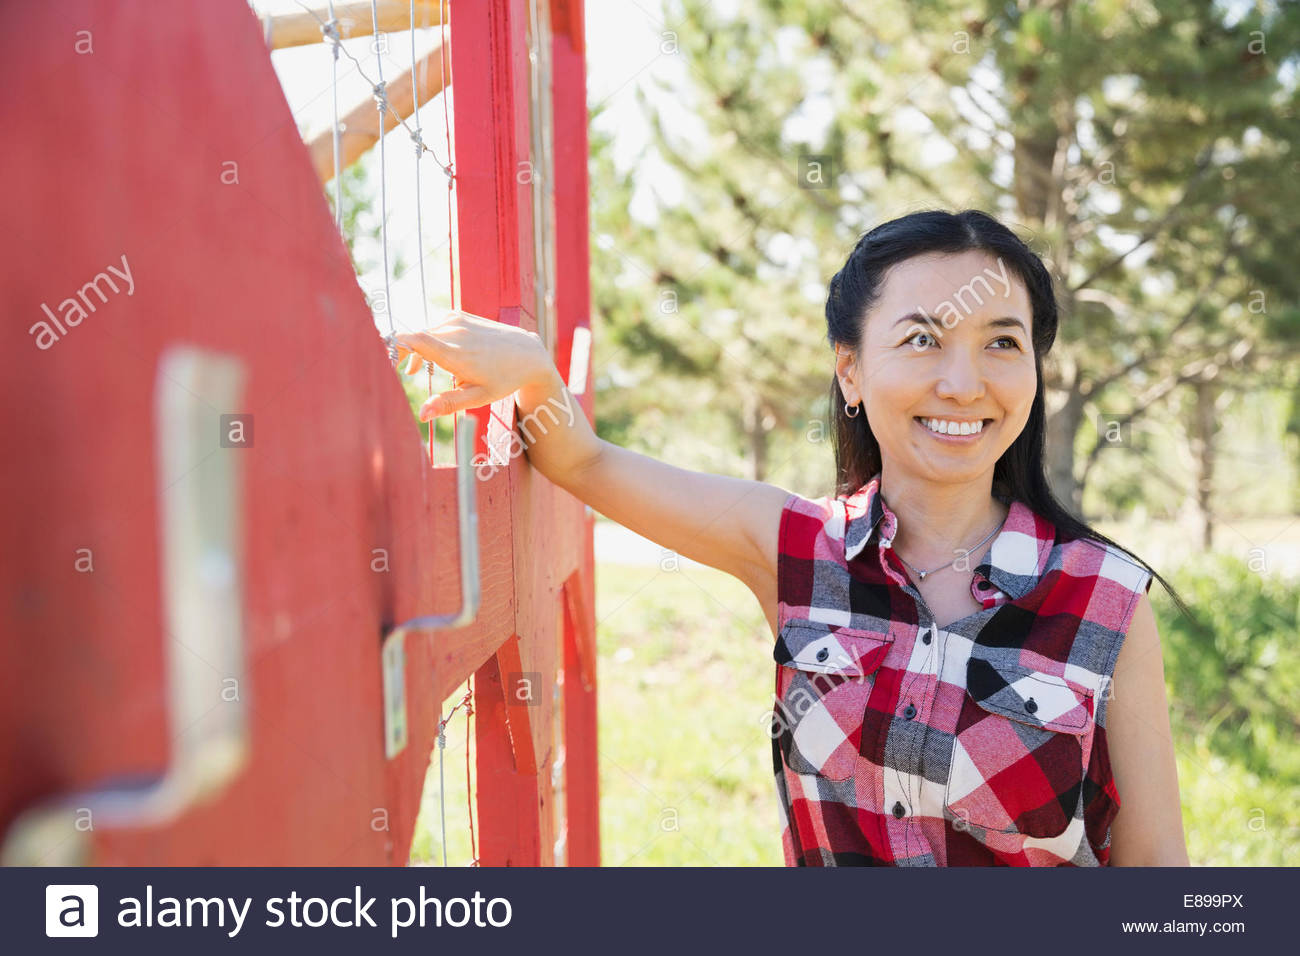 Smiling woman leaning on fence in garden Stock Photo